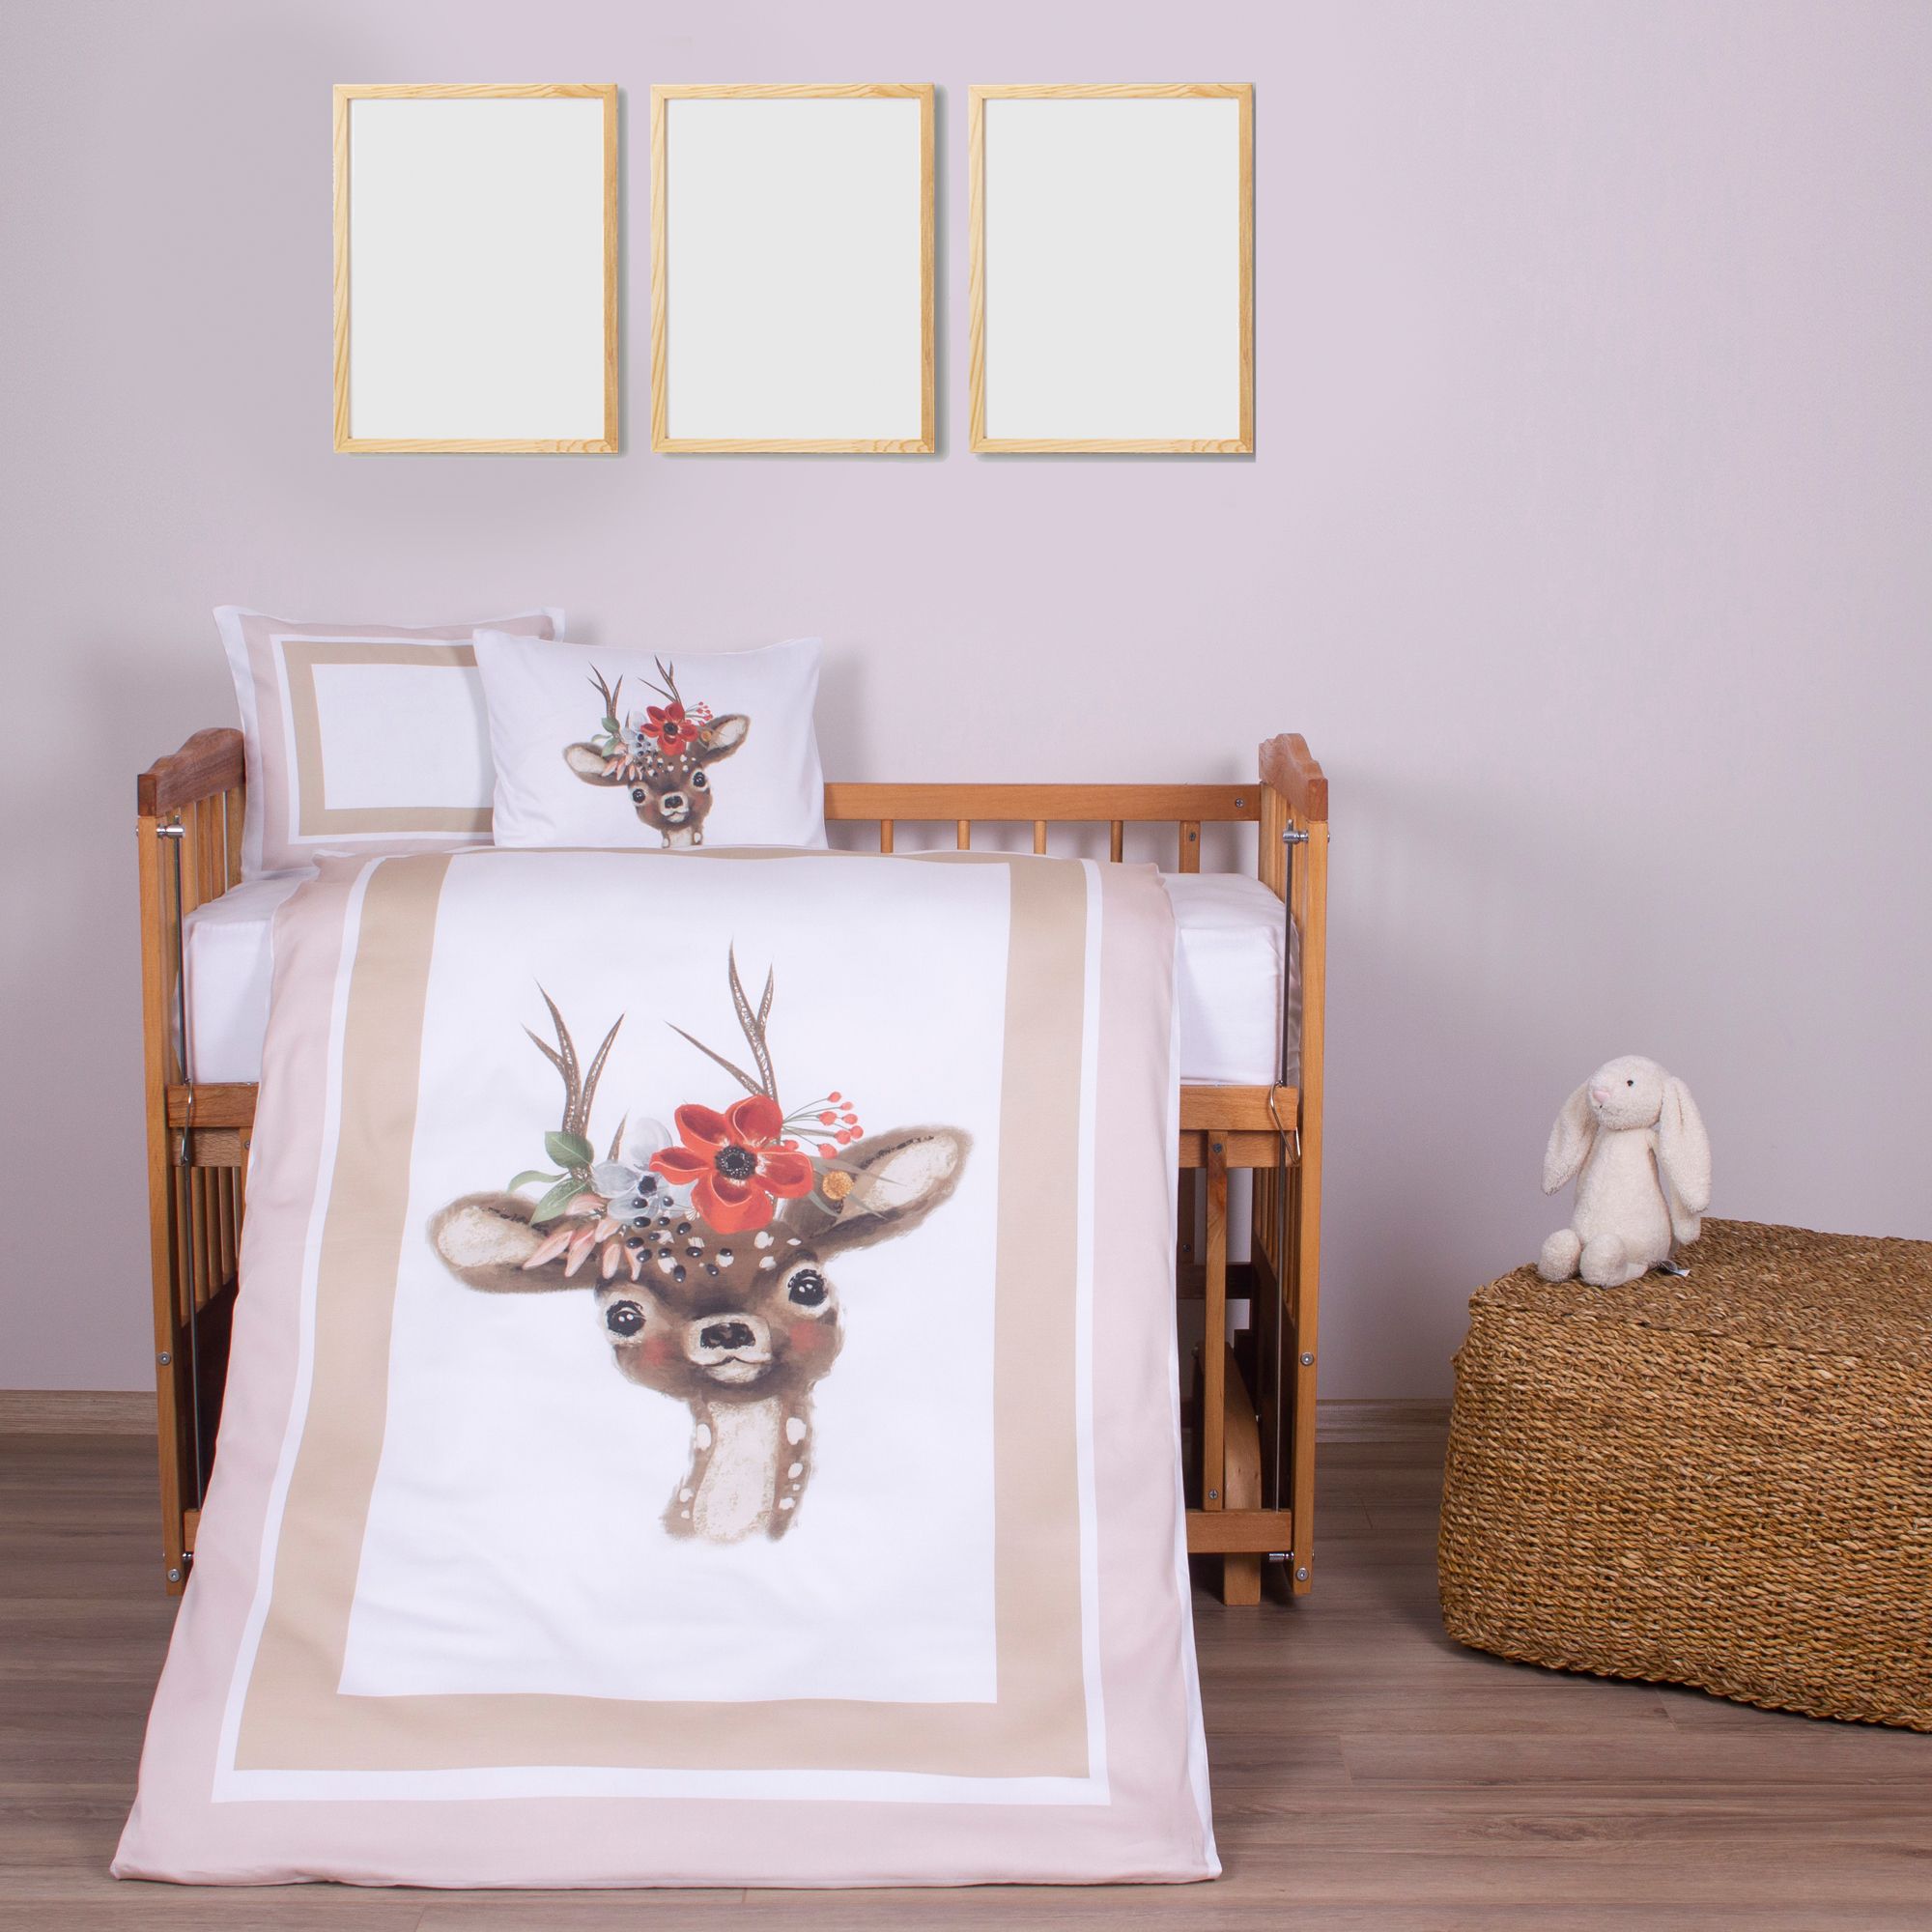 Organic Printed Cotton Satin Baby Duvet Cover Set - Deer And Flower Themed